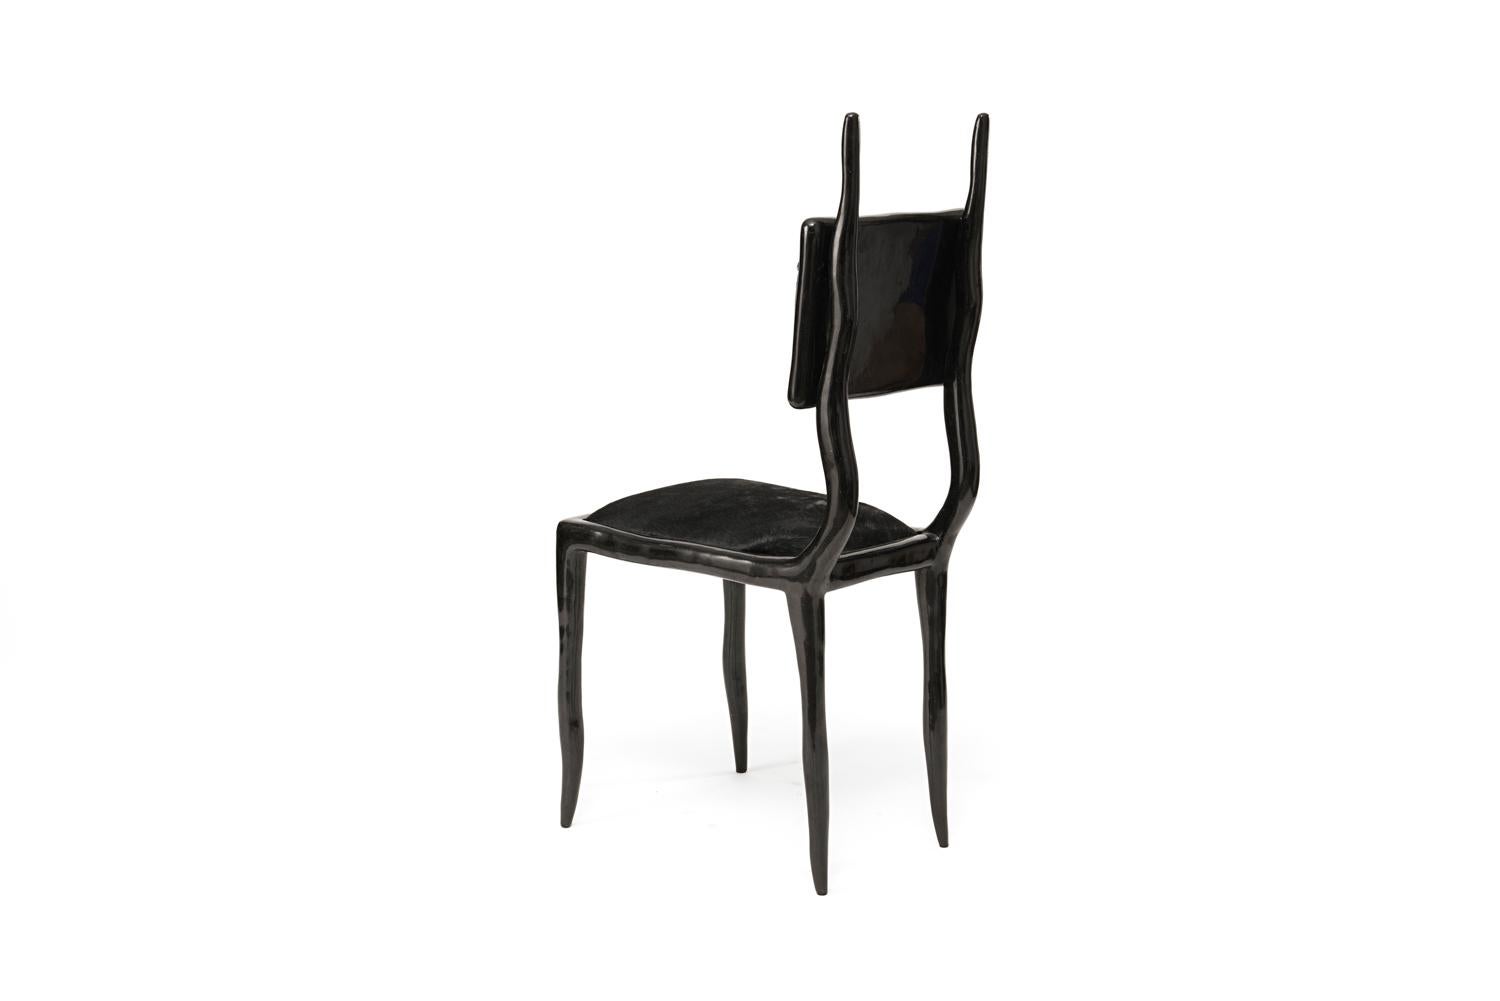 The Eden chair in black pen shell and upholstered in black calf-hair adds the perfect balance between fantasy and modernity to any space. This chair can be used as an entrance piece accent or dramatized around a dining room table. The pen shell is